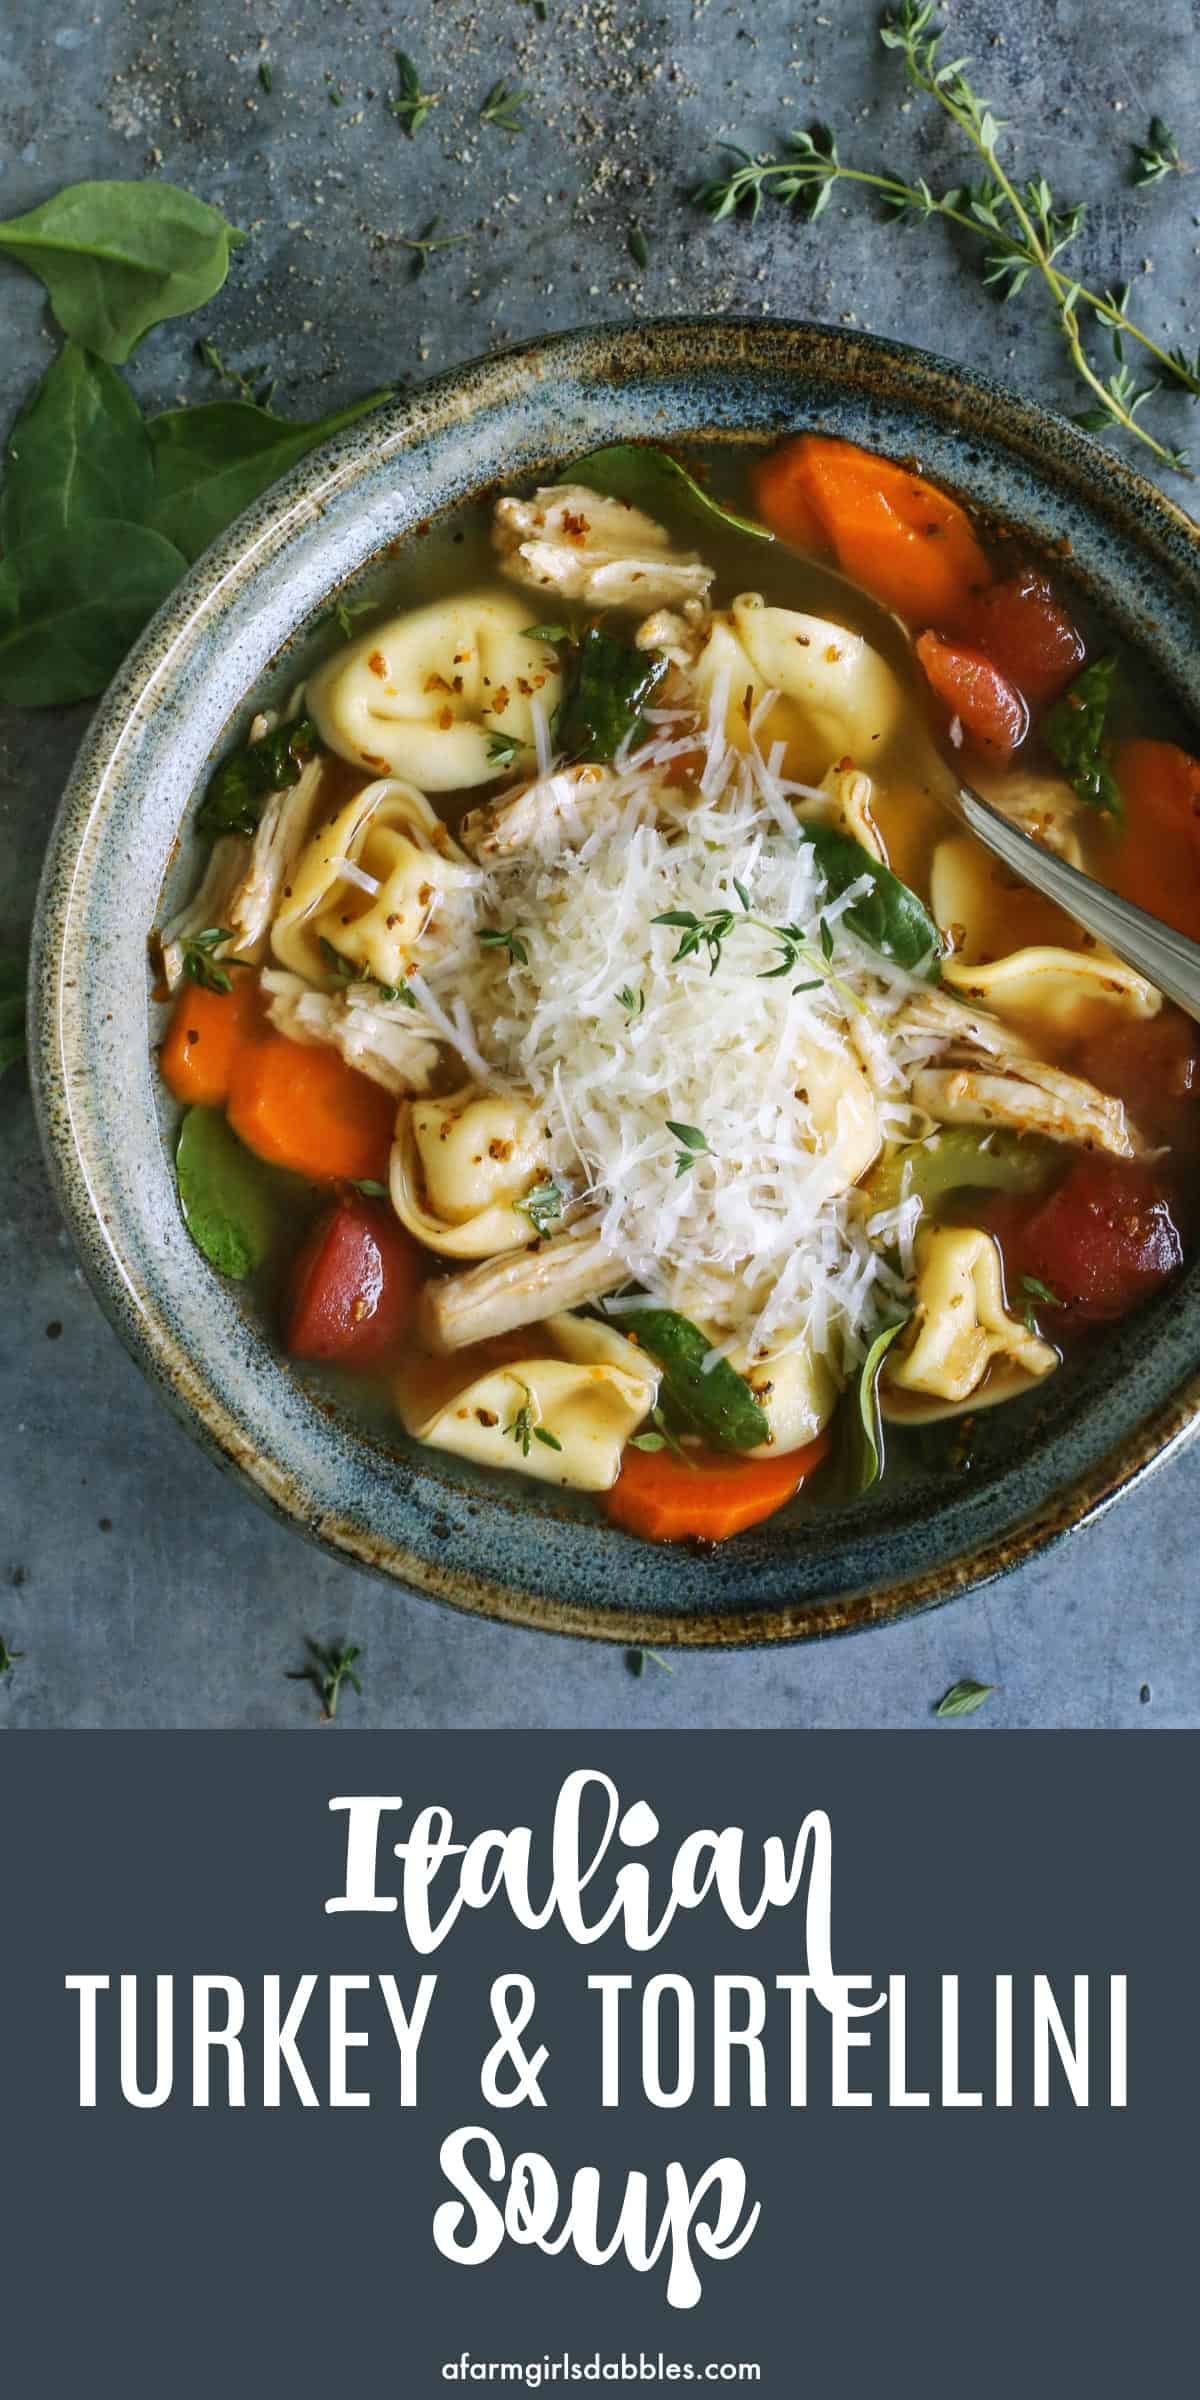 pinterest image of turkey tortellini soup in blue pottery bowl, with fresh Parmesan and herbs